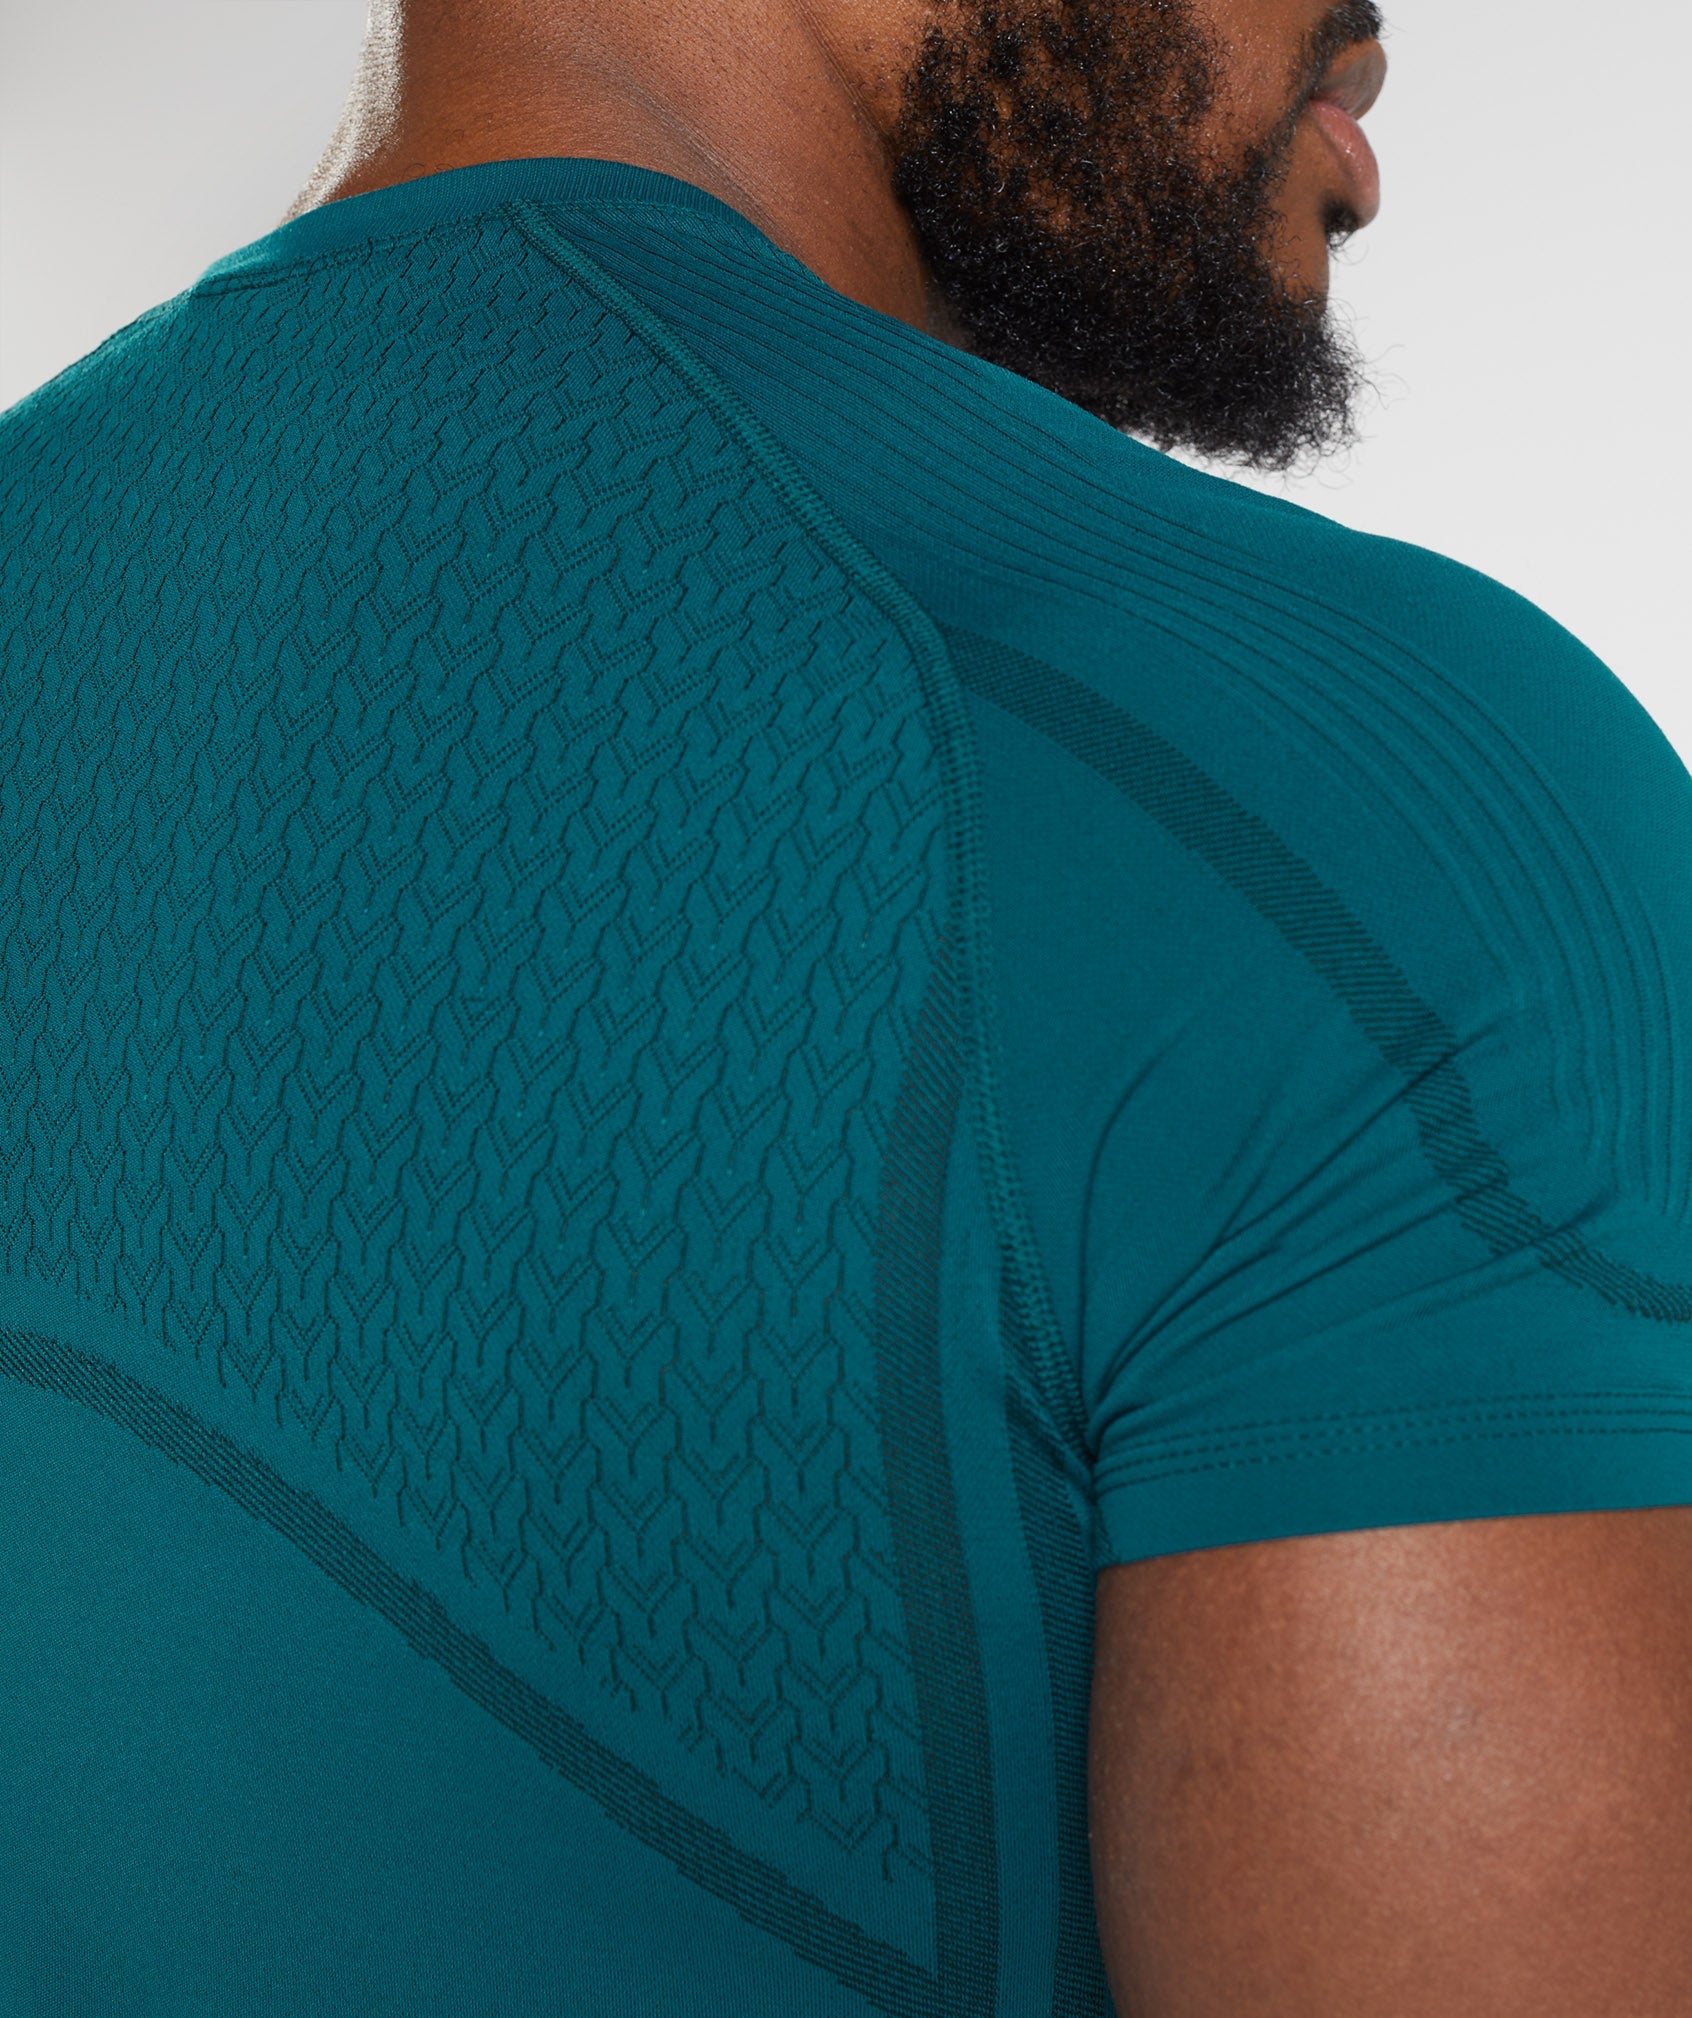 315 Seamless T-Shirt in Winter Teal/Black - view 5